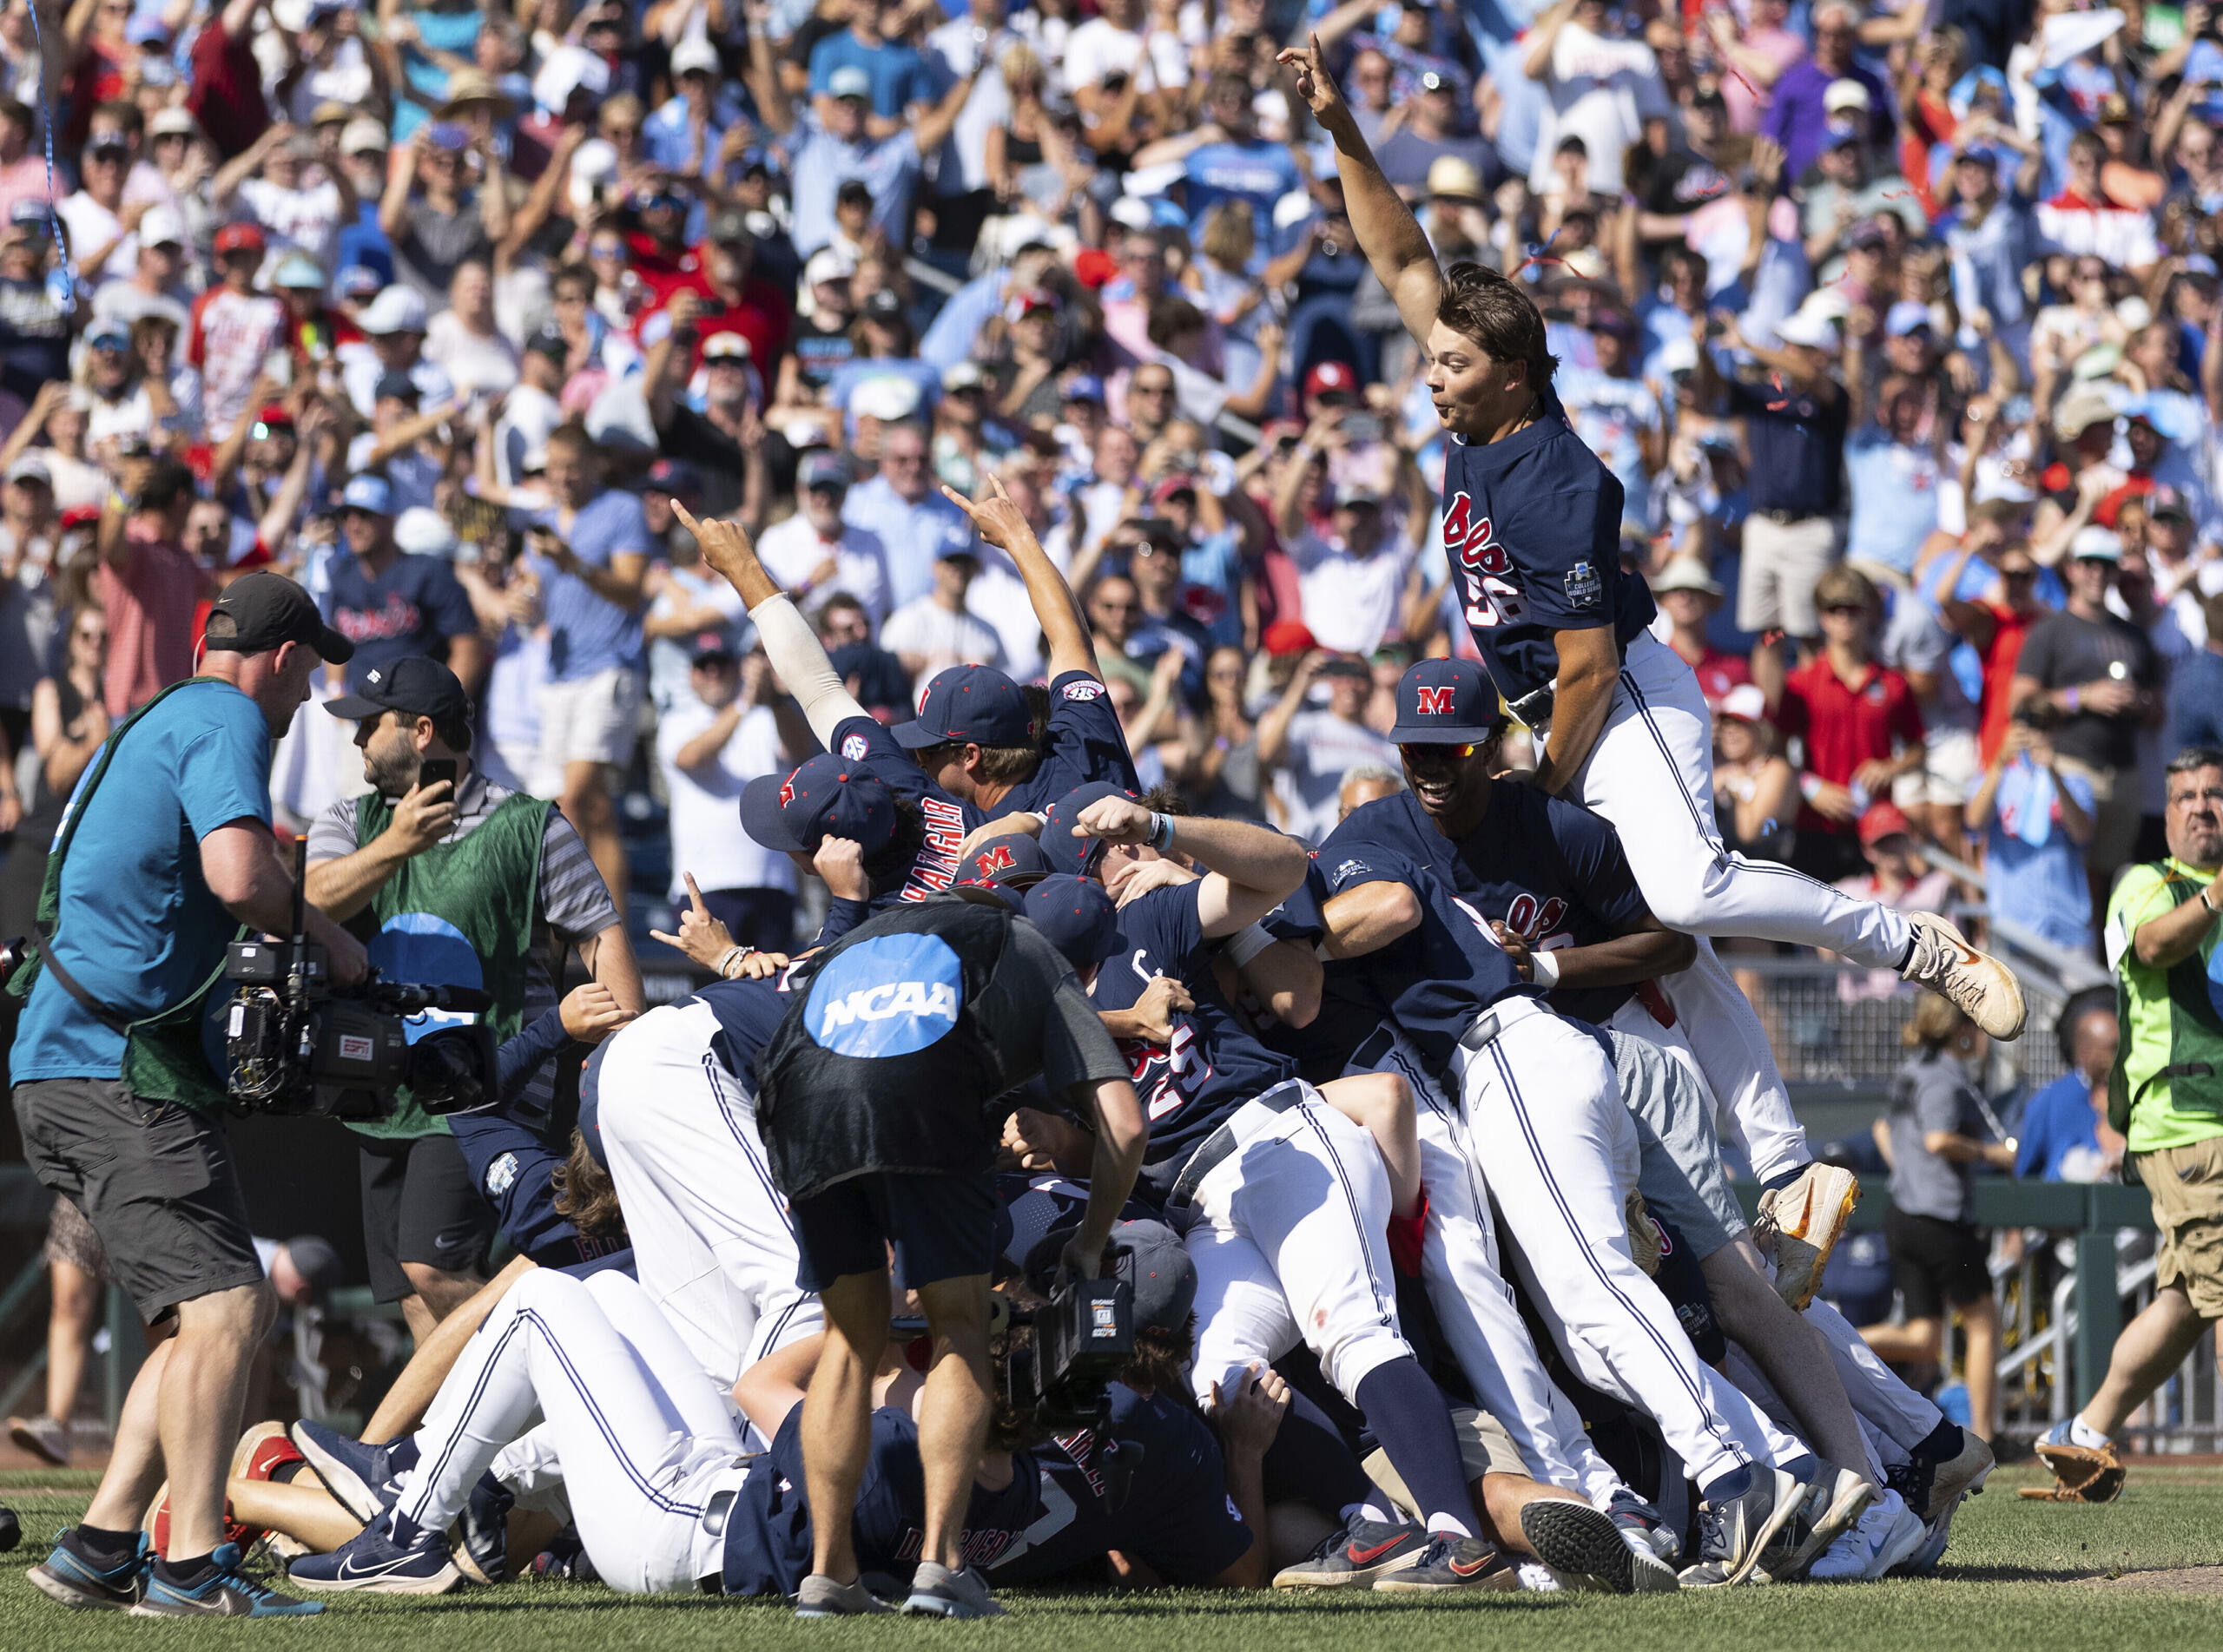 Mississippi's Jack Washburn, right, leaps on top of the team pile in celebration of their 4-2 victory over Oklahoma in Game 2 of the NCAA College World Series baseball finals, Sunday, June 26, 2022, in Omaha, Neb. Mississippi defeated Oklahoma 4-2 to win the championship. (AP Photo/Rebecca S.